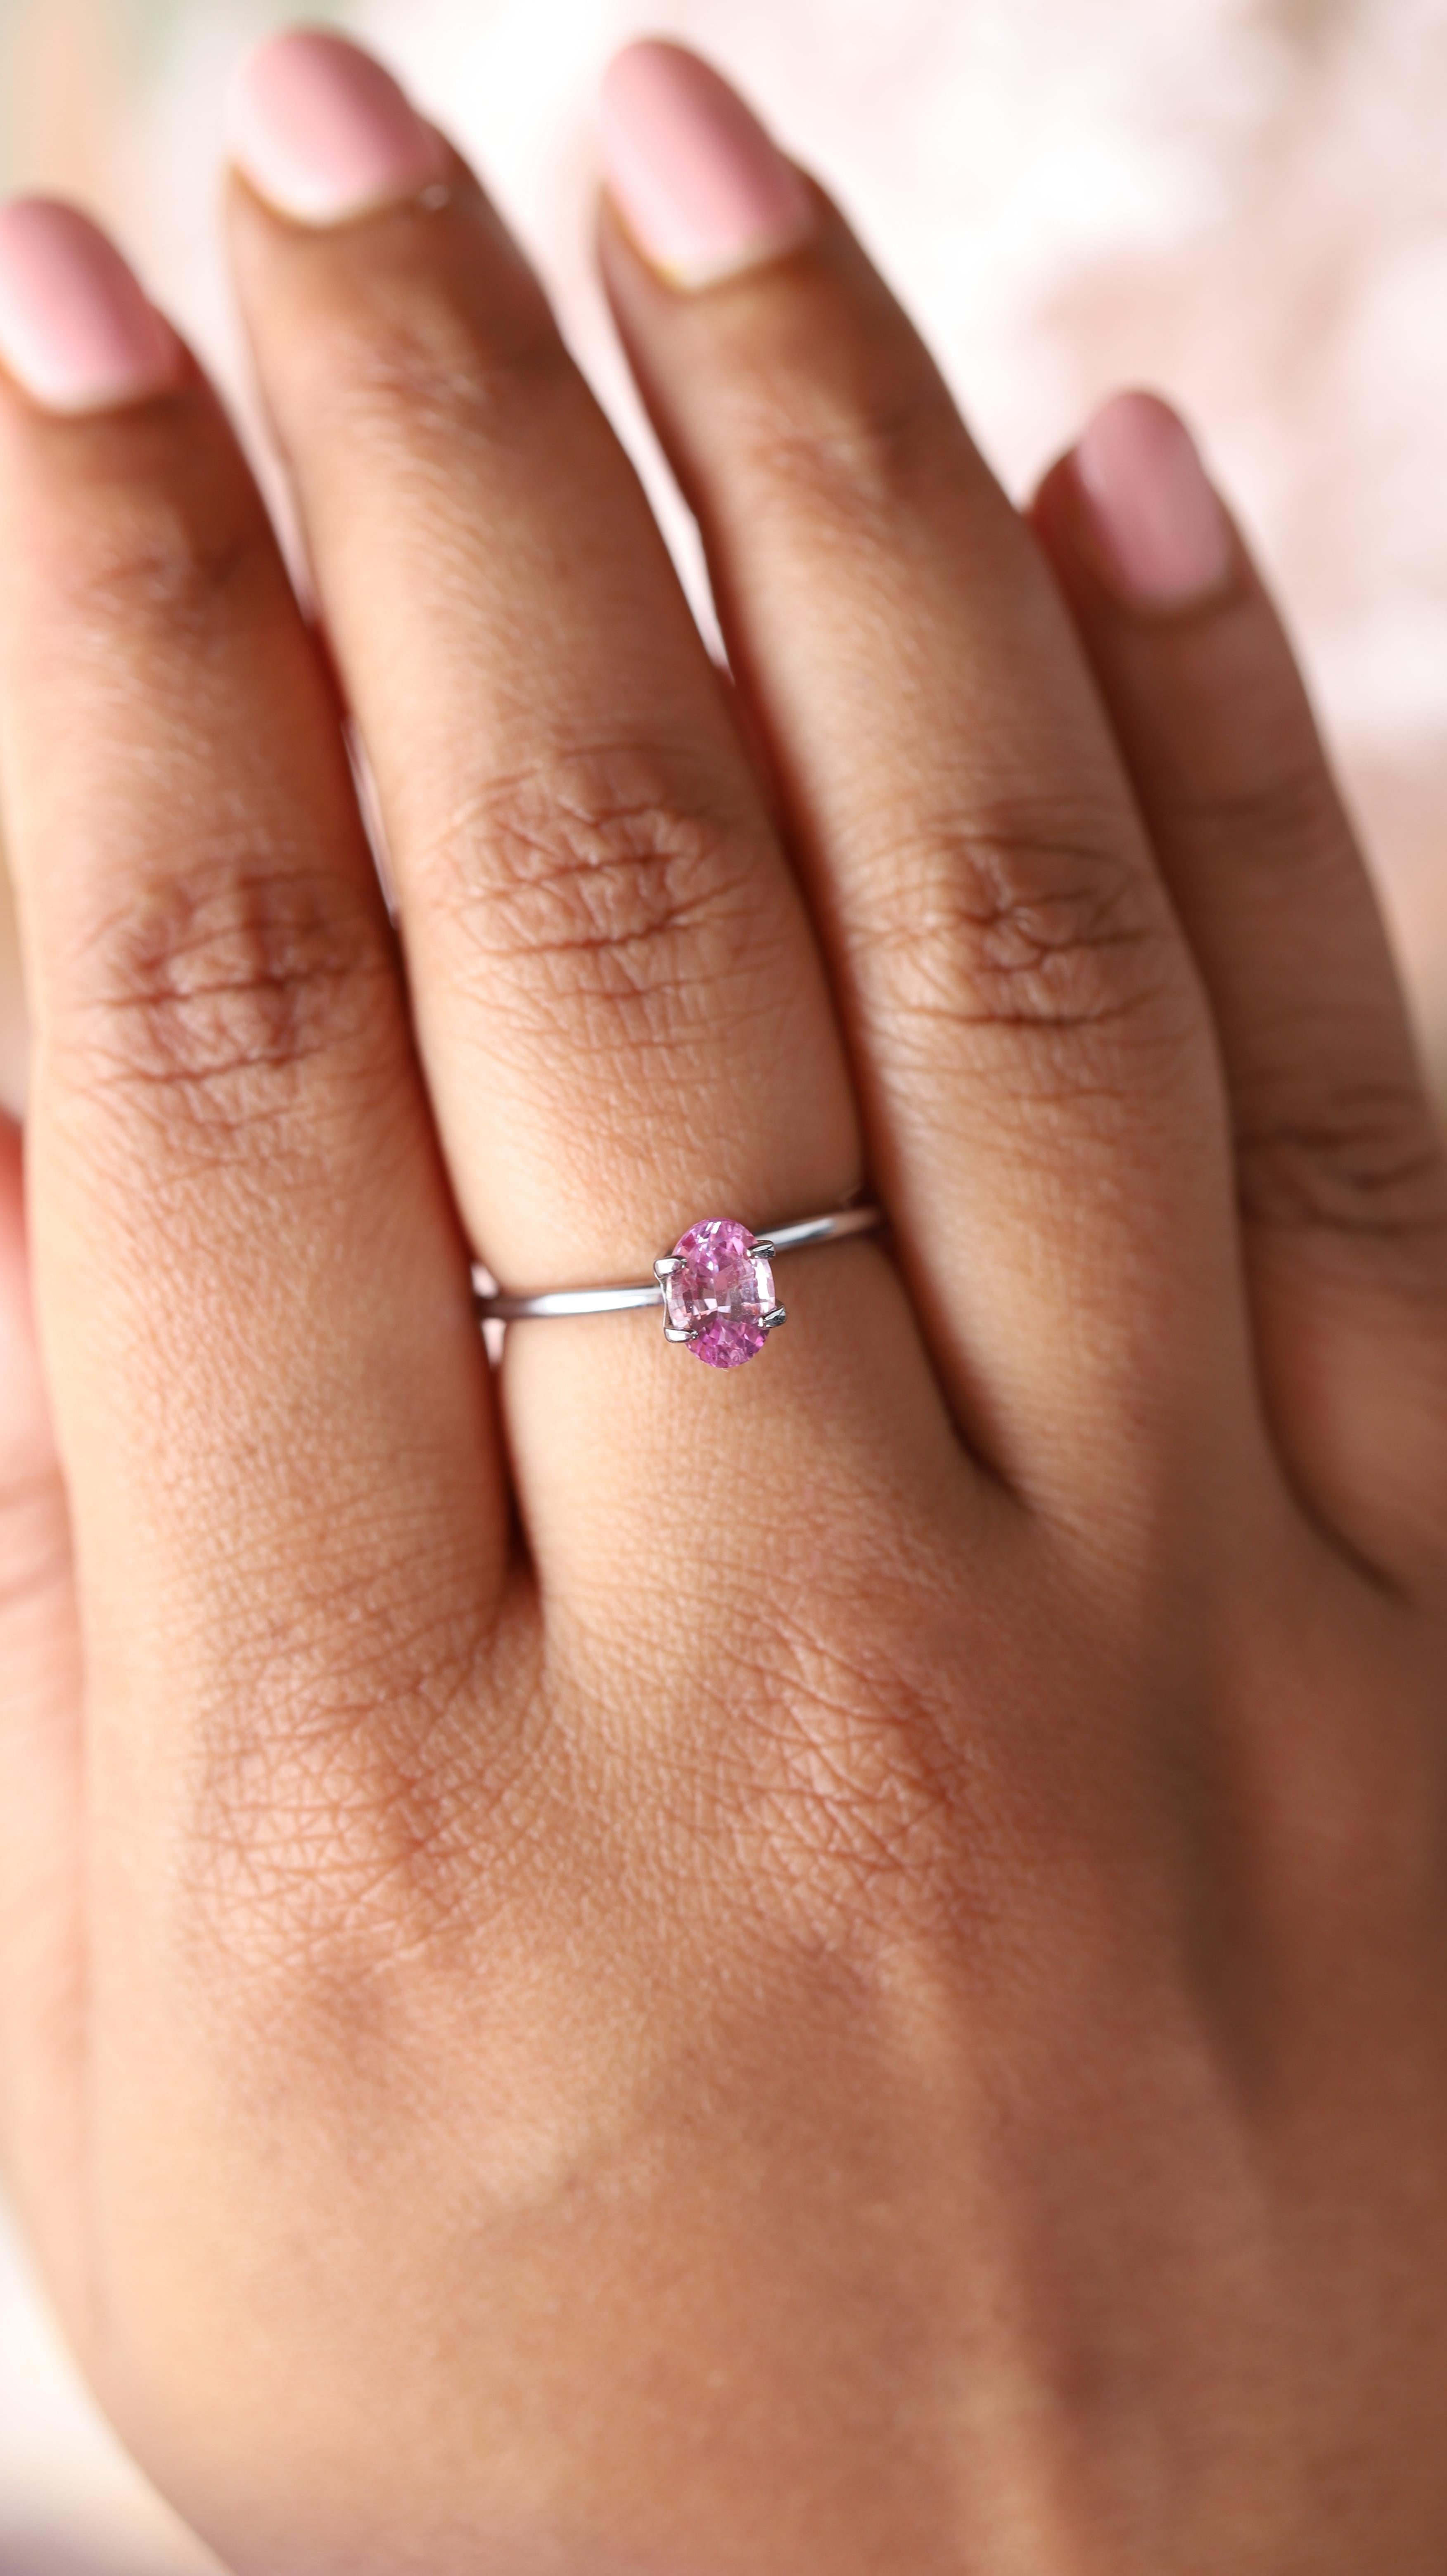 The magnificence of this rosy sapphire conjures images of the loveliest pink roses in full bloom. Its pristine facets shimmer brilliantly, showcasing the gem’s clean interior and radiating a soft pink glow from its elegantly shaped oval form.  